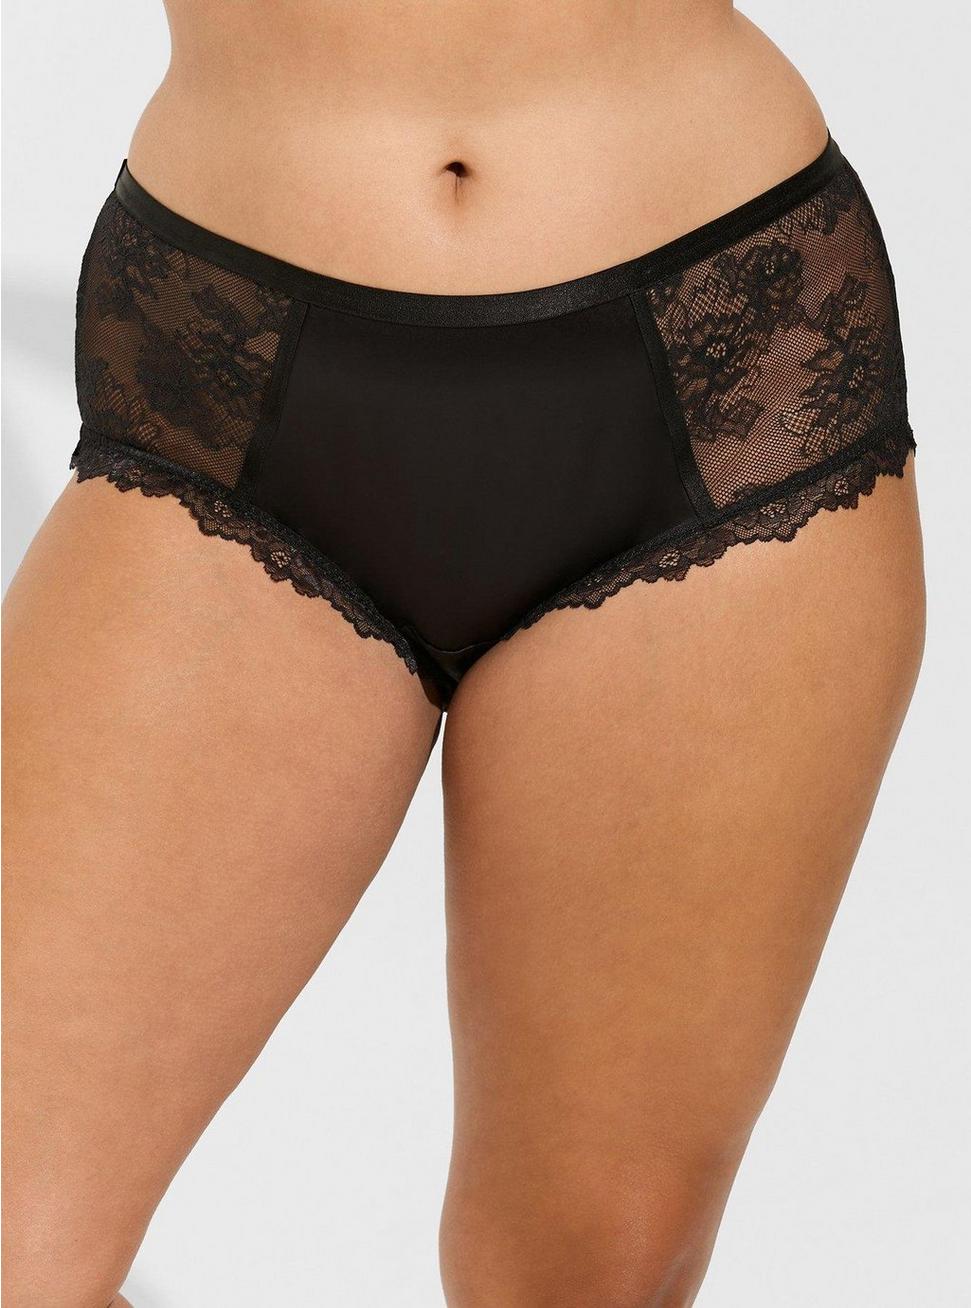 Plus Size Retro Lace Cheeky with Lace Up Detail, RICH BLACK, alternate